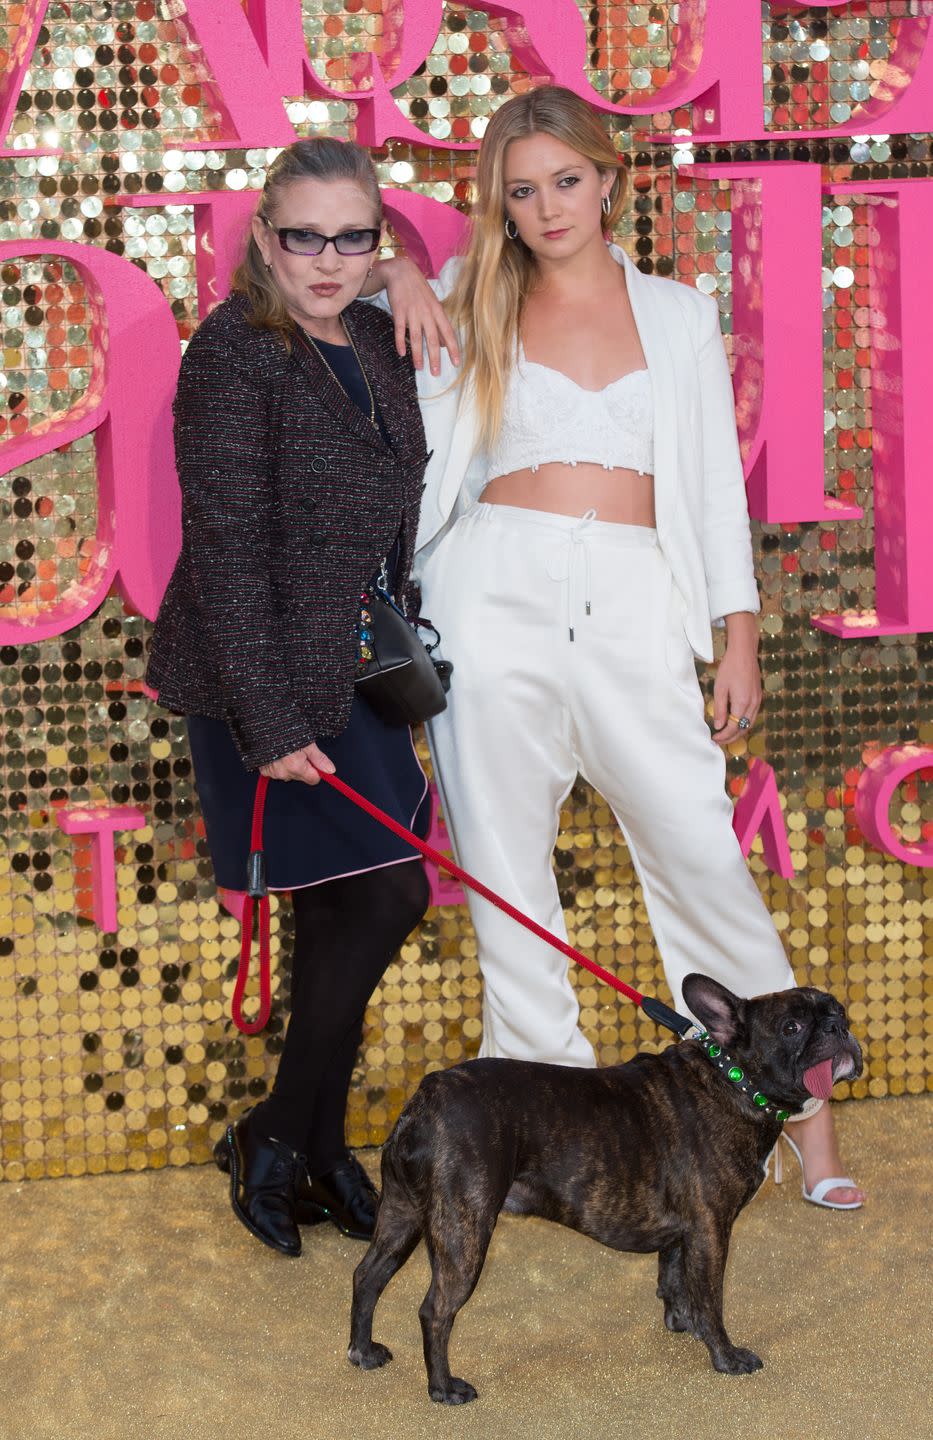 <p>Billie Lourd is most known for her roles in <em>Scream Queens </em>and <em>American Horror Story. </em>However, she recently honored her late mother Carrie Fisher's legacy by appearing in 2019's <em>Star Wars: The Rise of Skywalker.</em></p>